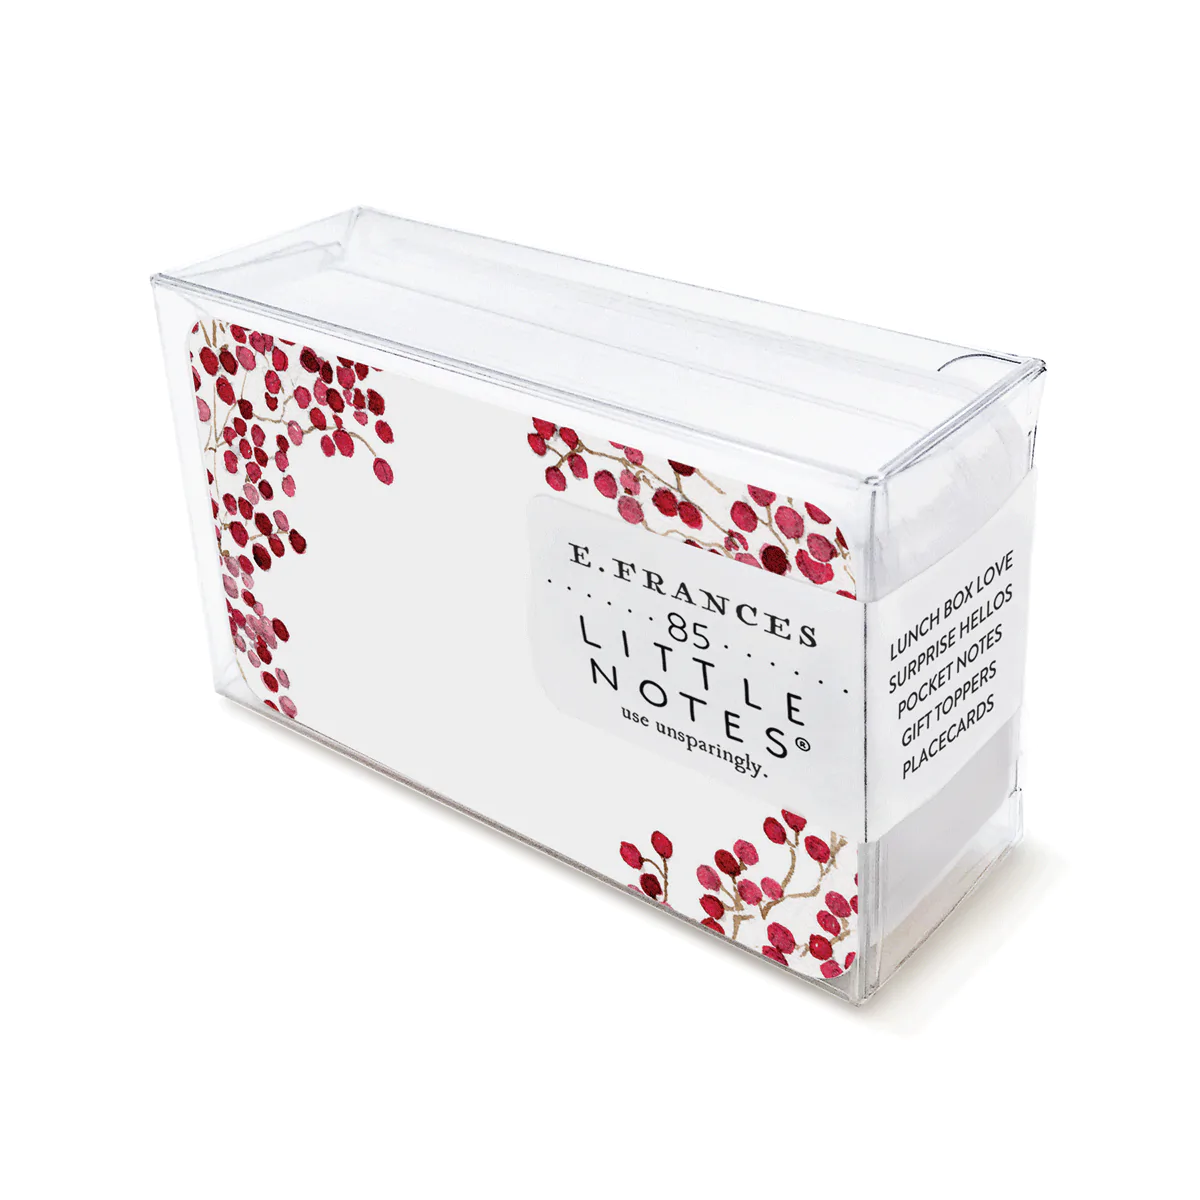 Little Notes - Red Berries - Danshire Market and Design 